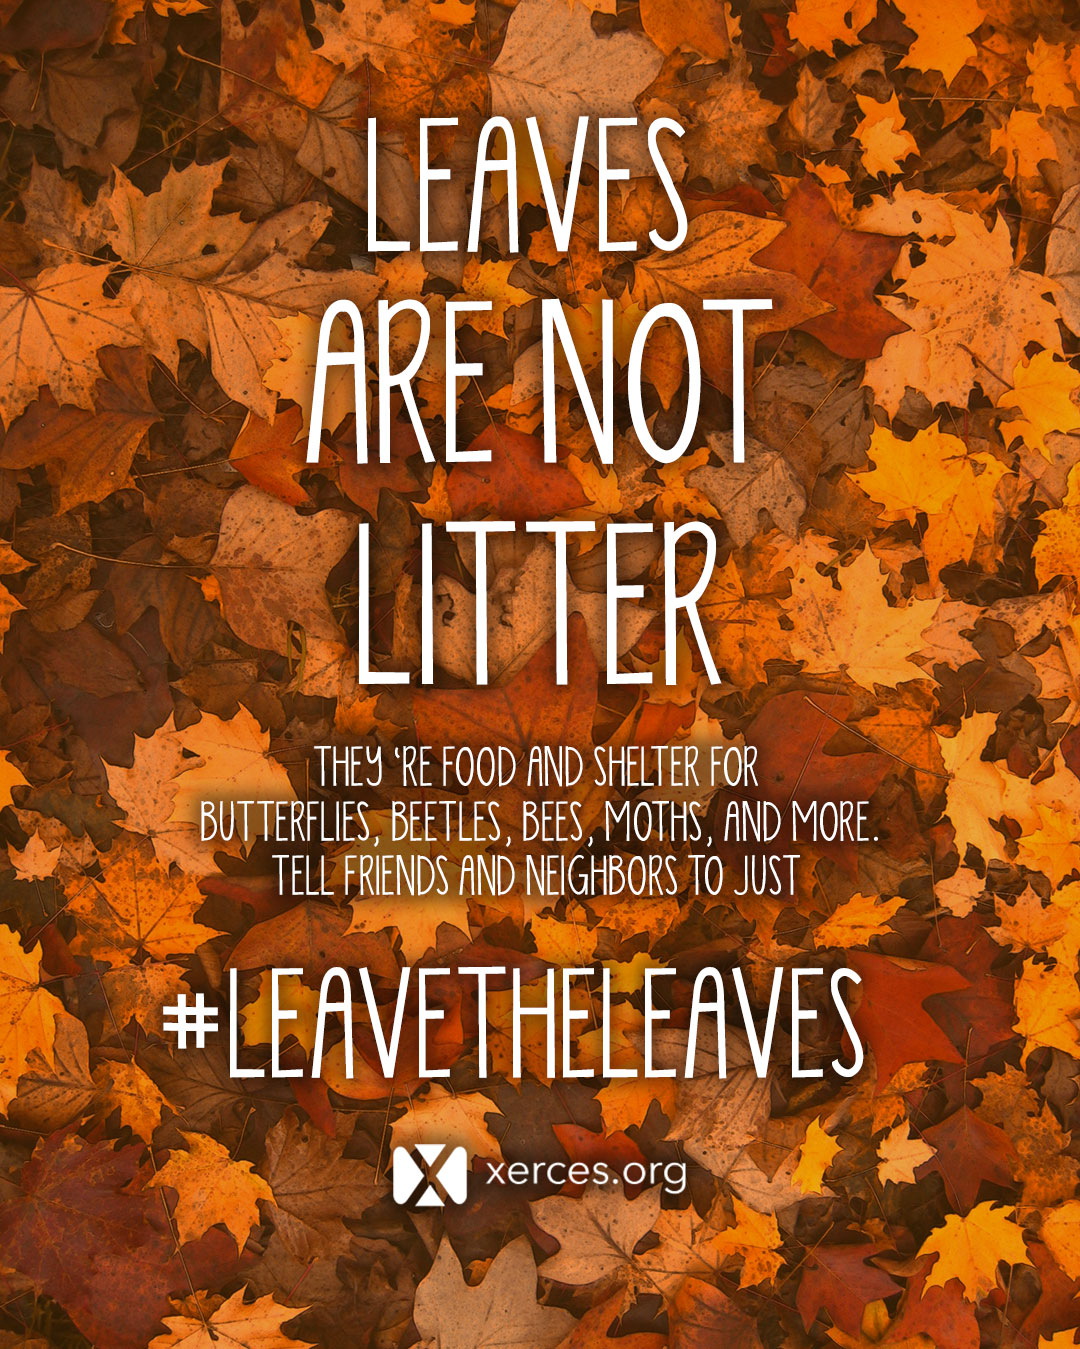 Over a background of fallen leaves, text reads, "Leaves are not litter. They're food and shelter for butterflies, beetles, bees, moths, and more. Tell friends and neighbors to just #leavetheleaves." Xerces logo follows.